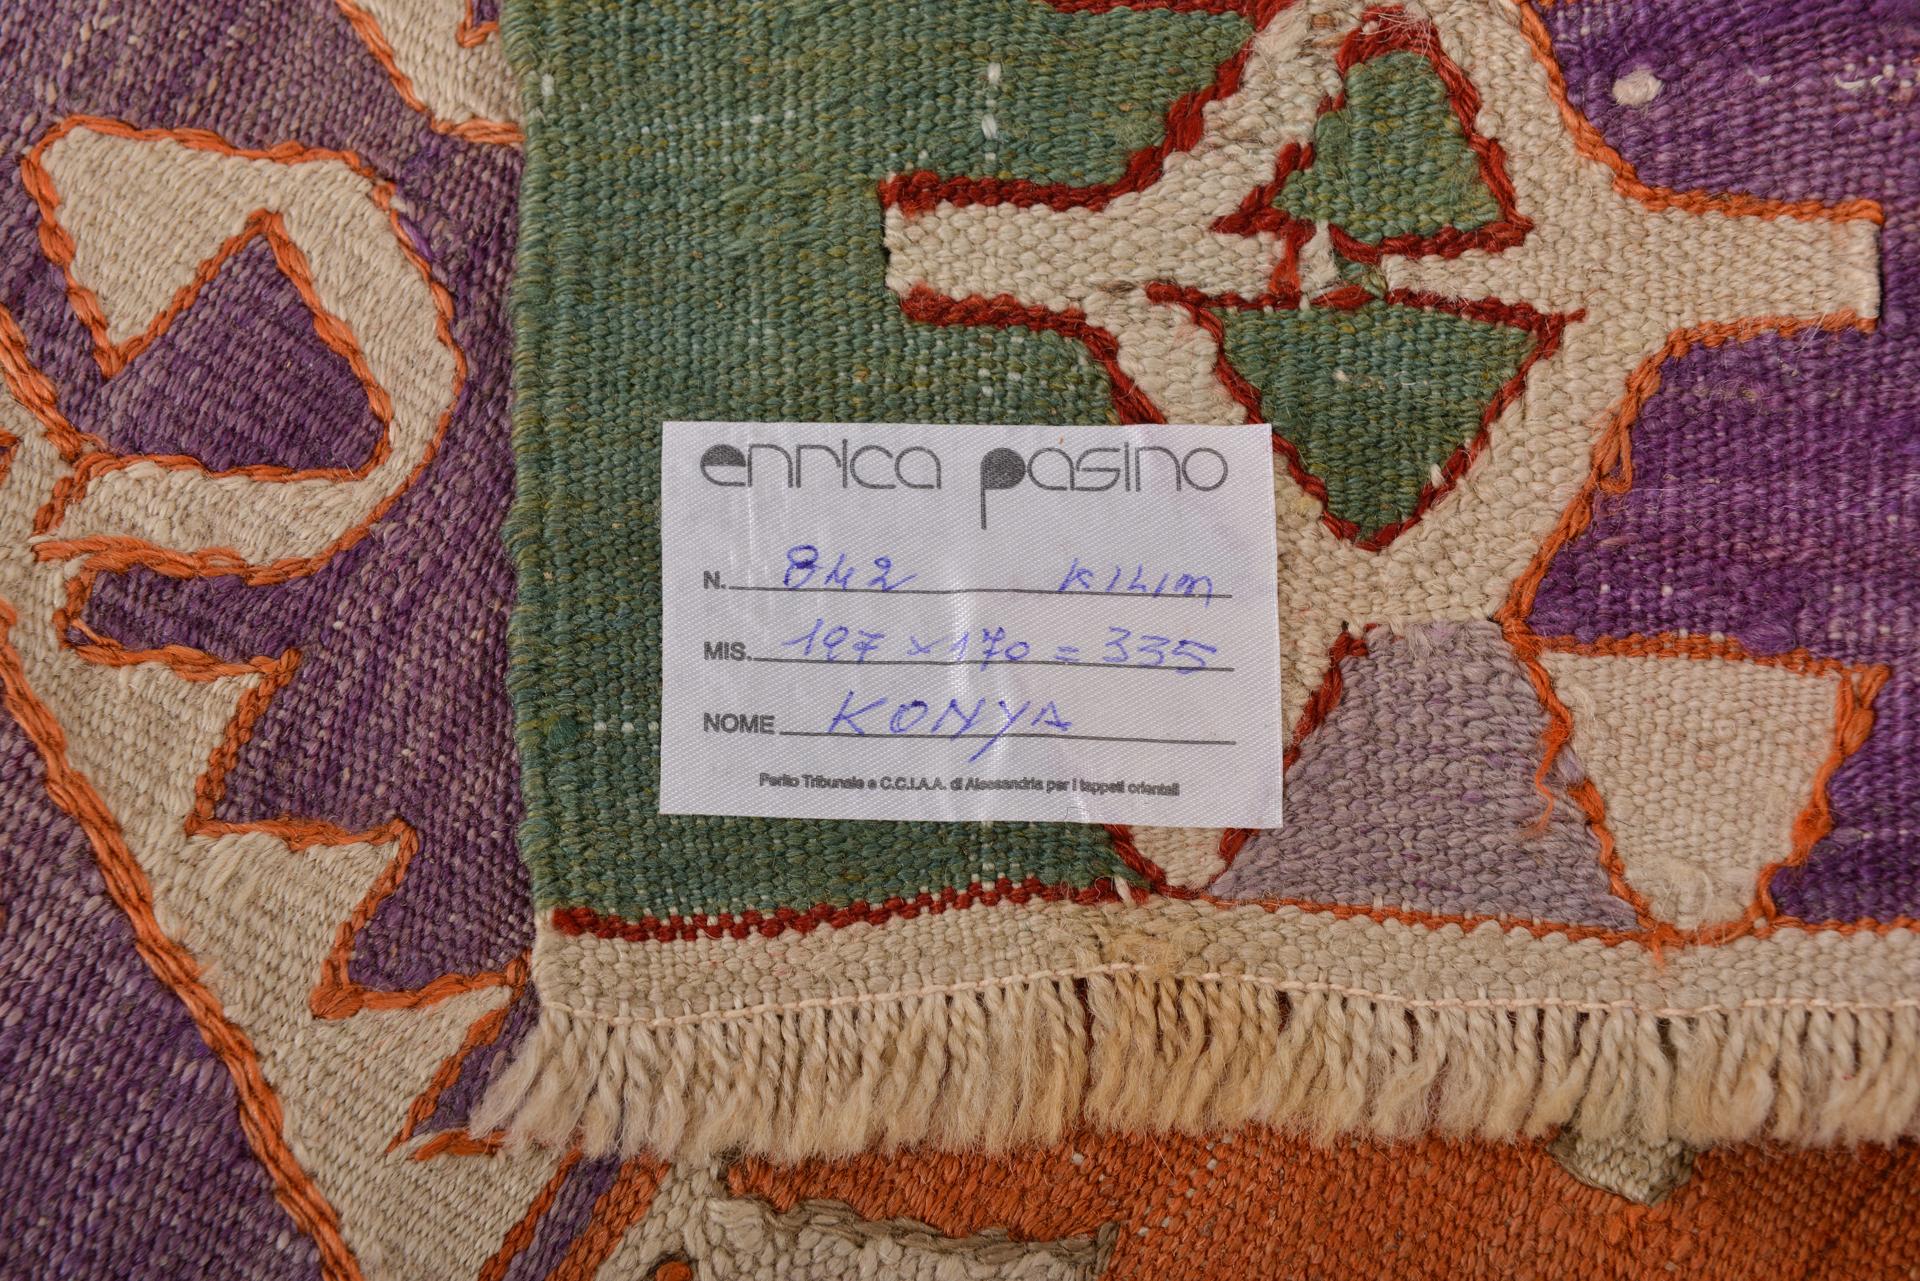 nr. 842 - Enchanting old kilim Konya : particular design and amazing colors - almost square measure.
Now the kilims are not only put on the floor, but also on the wall or laid on a sofa or on the bed.
As in the East!.
Now I wish to close my